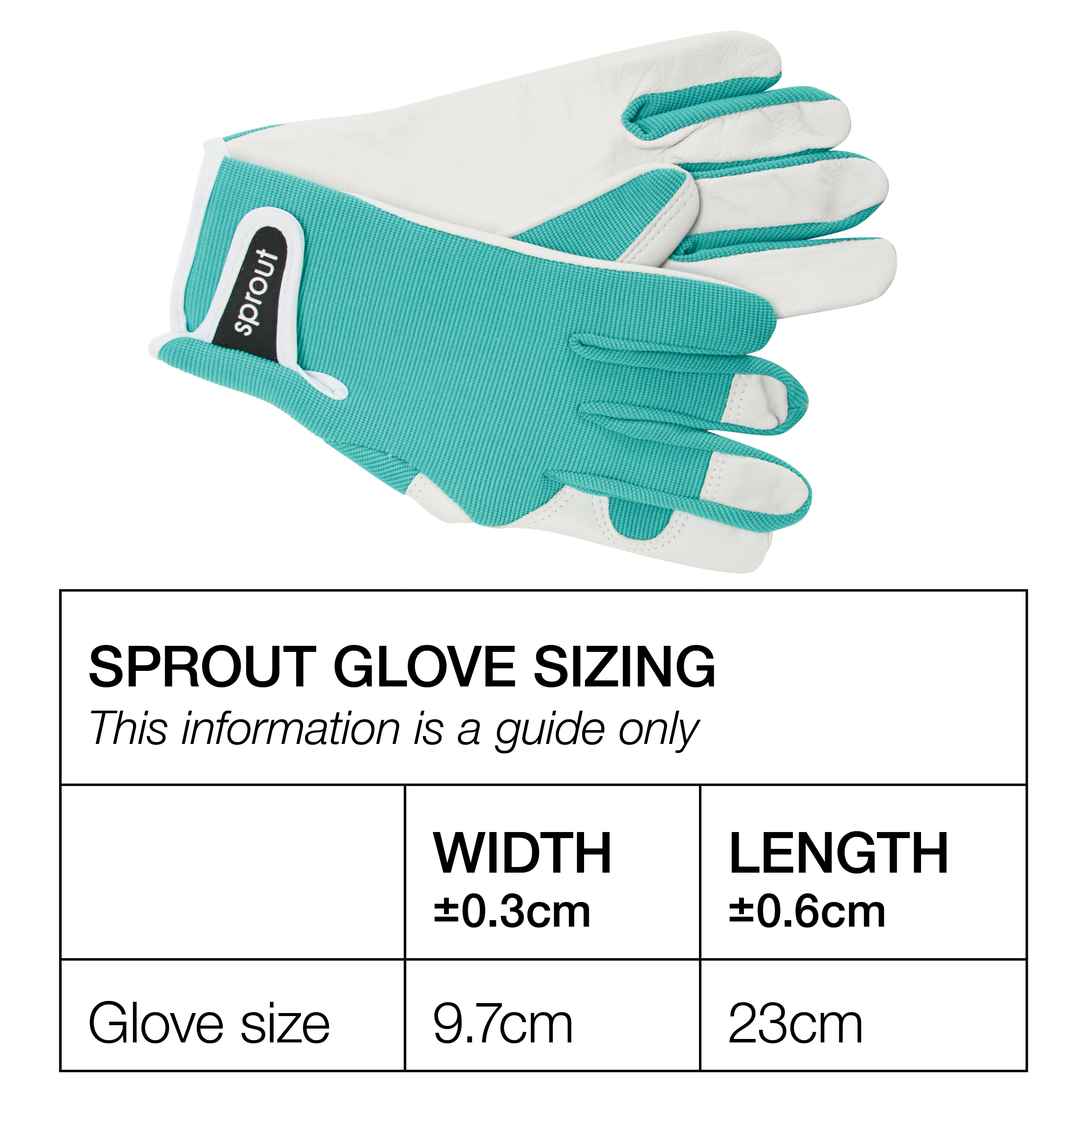 Sprout-Glove-sizing-chart